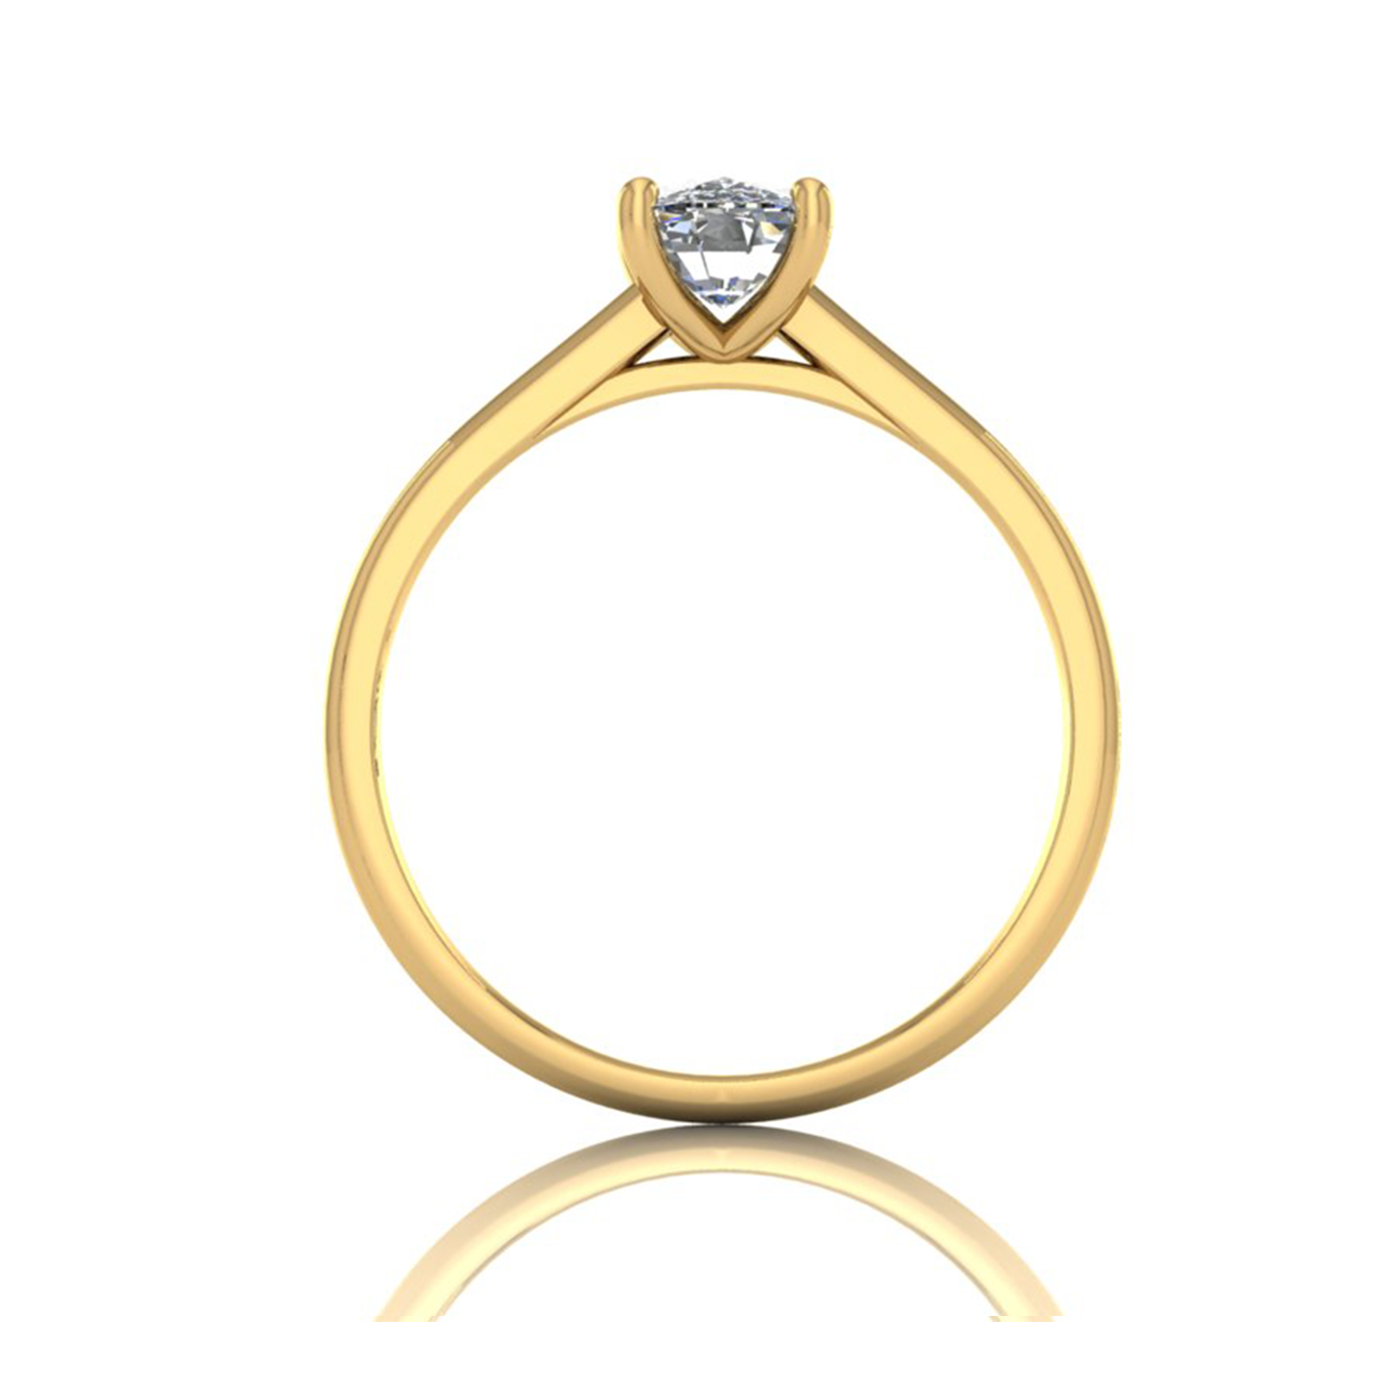 18k yellow gold 1,20 ct 4 prongs solitaire elongated cushion cut diamond engagement ring with whisper thin band